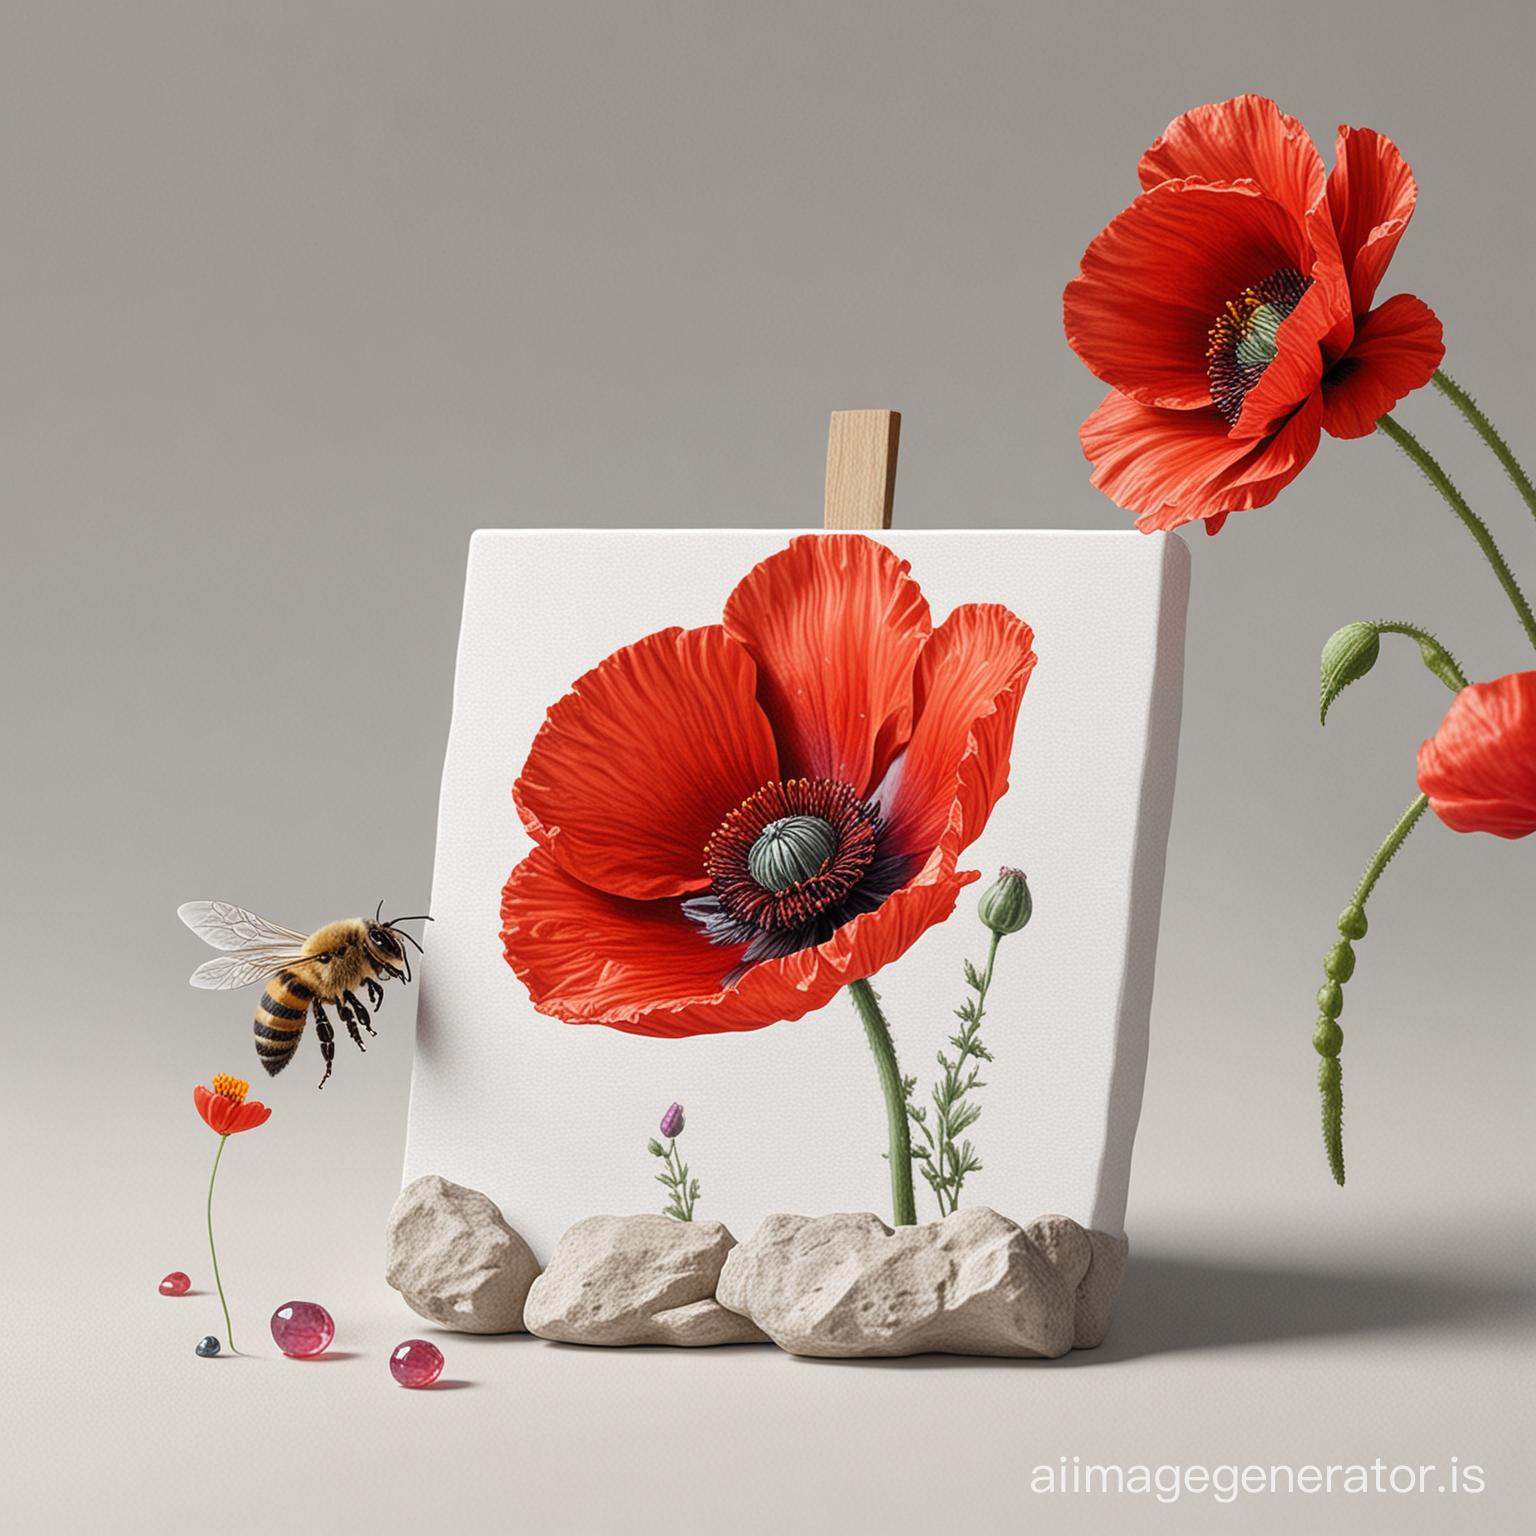 The art of making realistic paintings of precious stones, a minimalistic image of precious stones on a white canvas, a bee sits on a scarlet poppy flower, 16-bit color scheme, made up of precious stones